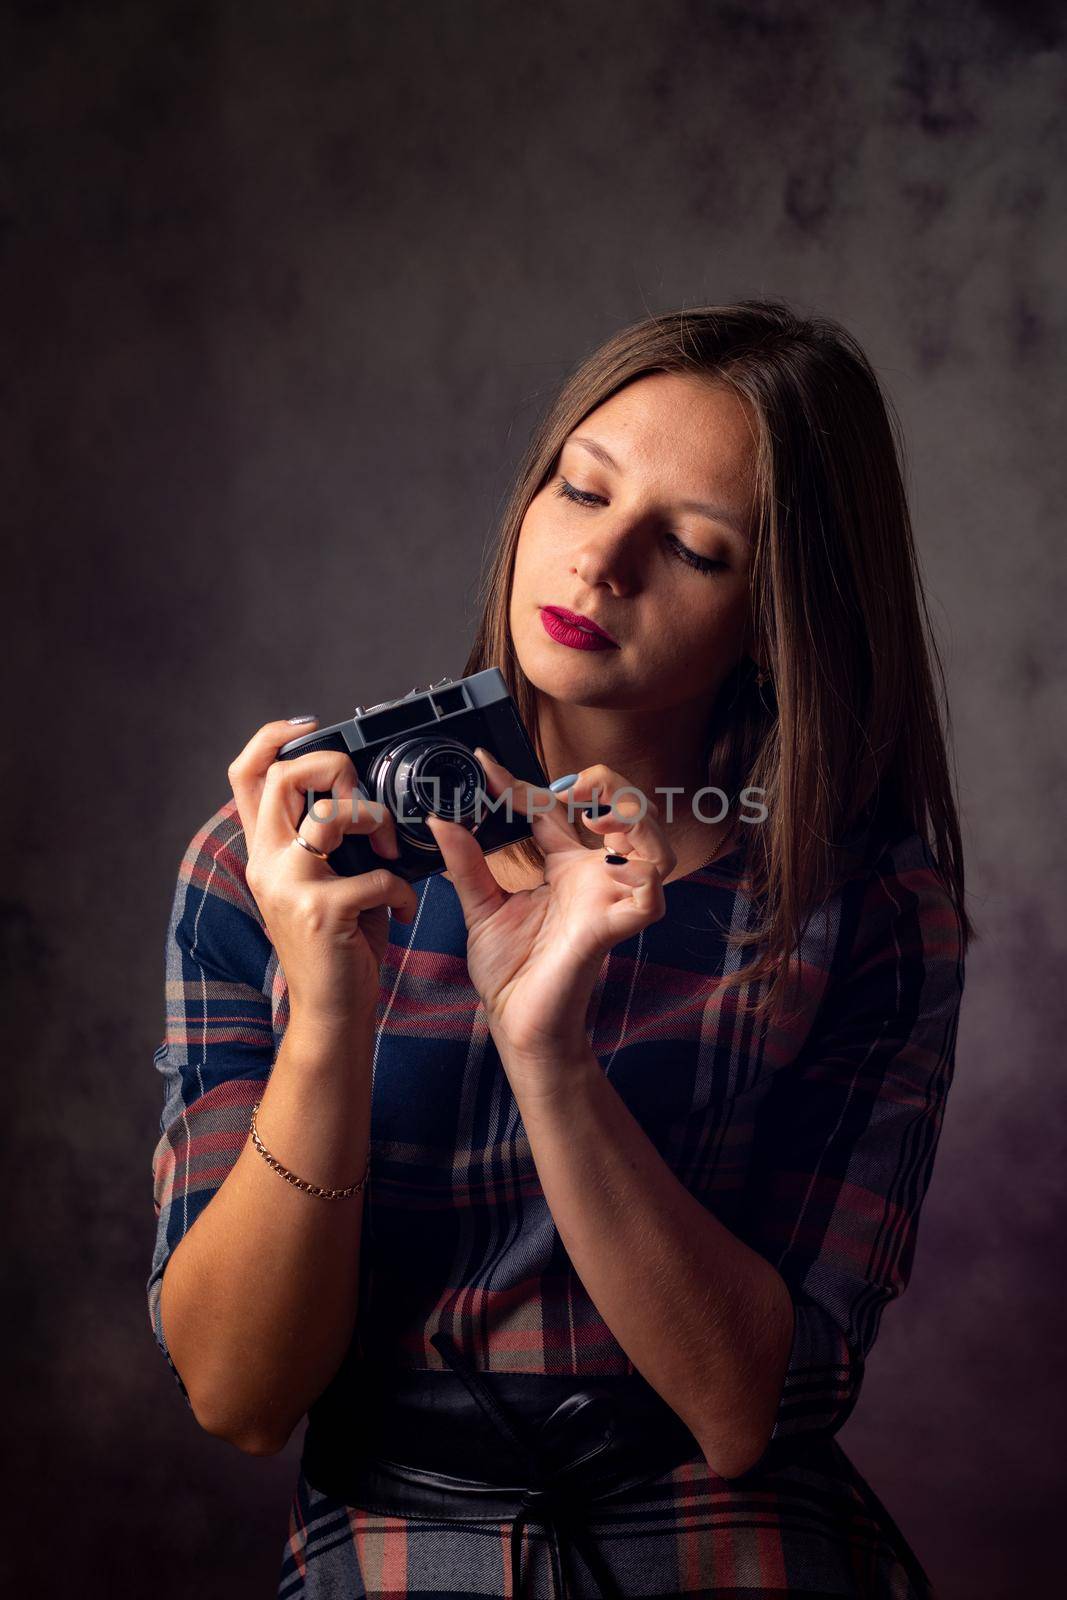 Girl photographer adjusts the camera, studio photography on a gray background